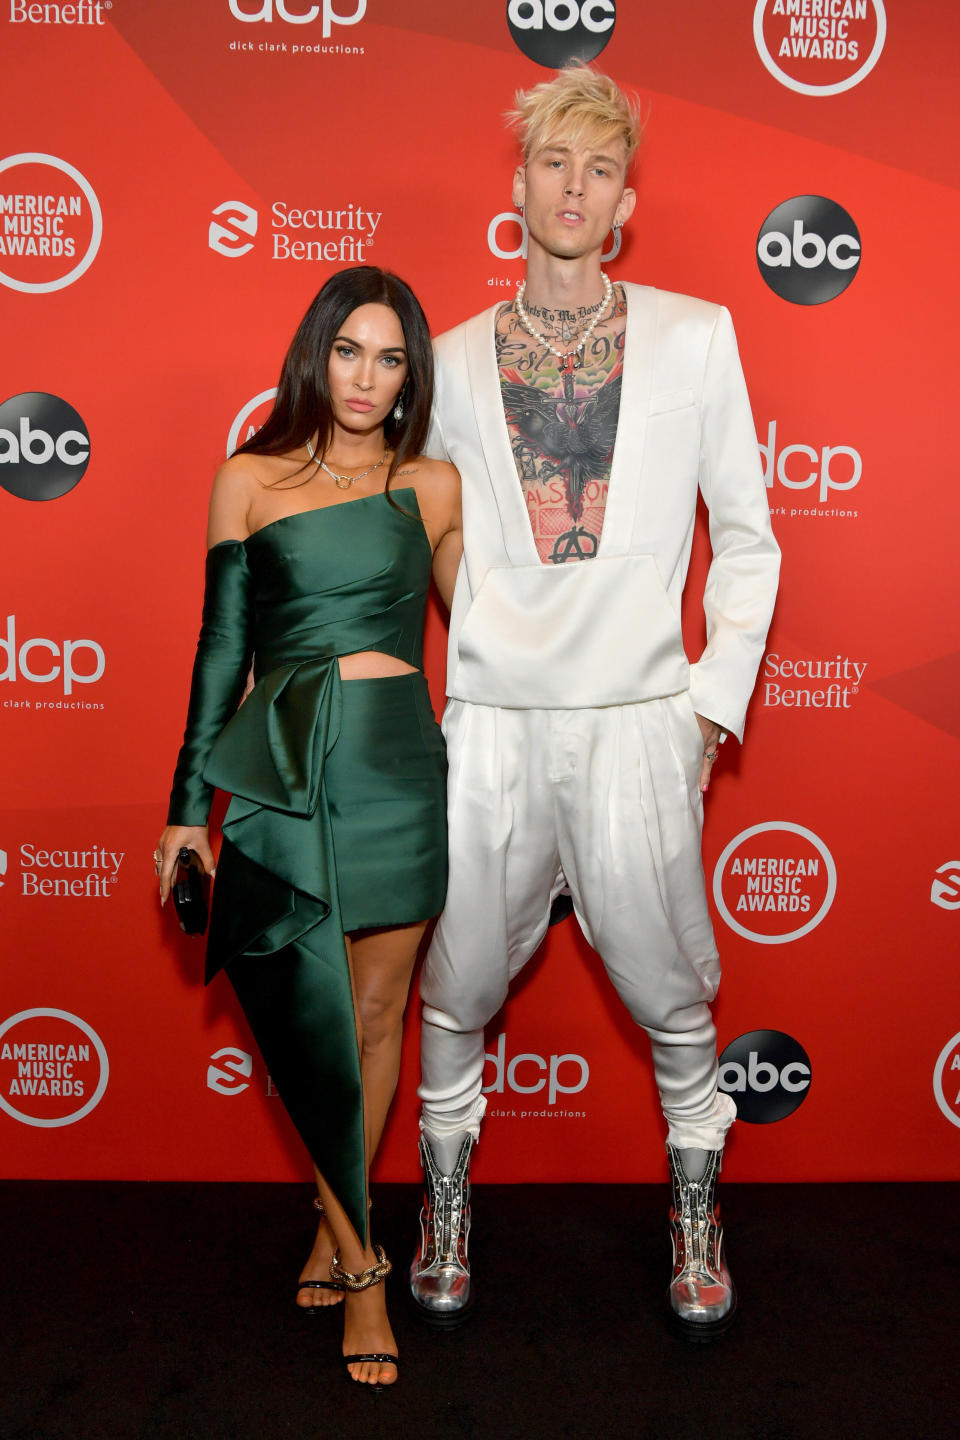 Megan Fox and Machine Gun Kelly attend the 2020 American Music Awards at the Microsoft Theater on Sunday in Los Angeles. (Photo: Emma McIntyre /AMA2020 via Getty Images)